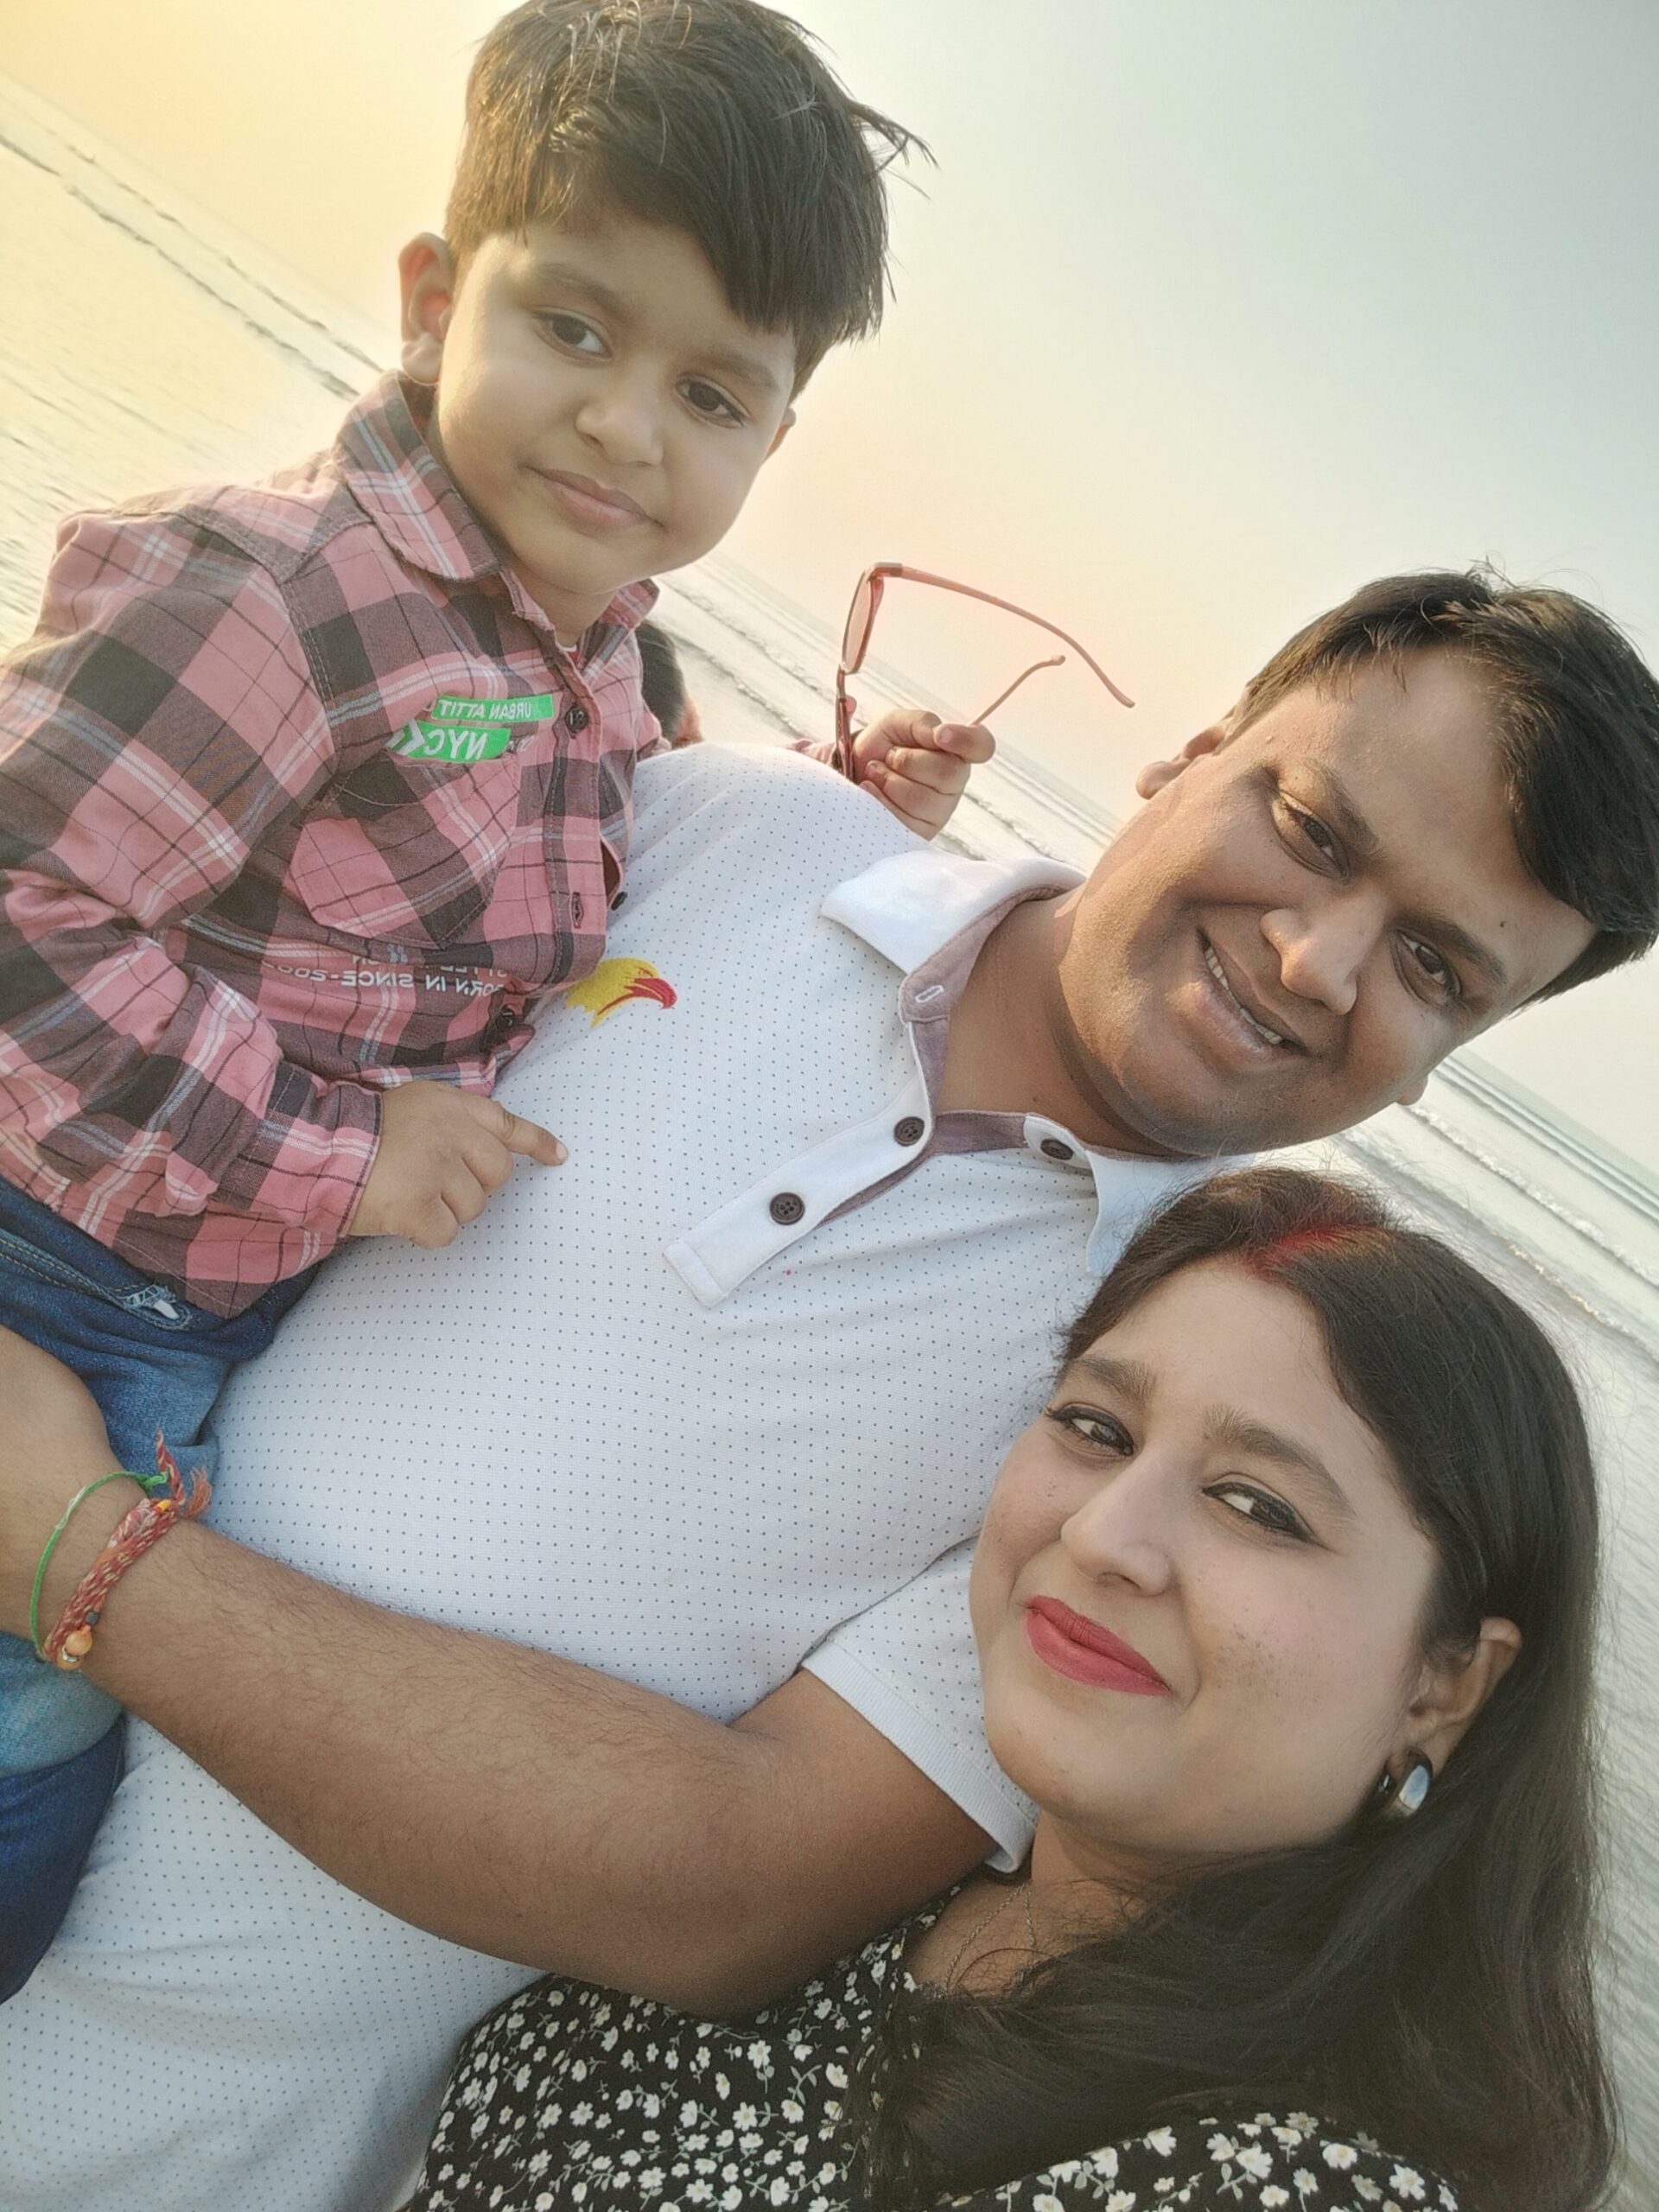 "Excellent language learning experience for my kid. Mrs Neelakshi shukla and her team is par excellence. Really happy with the way she has helped my kid learning the language. She is very patient and encourages all the kids a lot”Phonic classes helped my son to develop confidence while speaking and reading English."